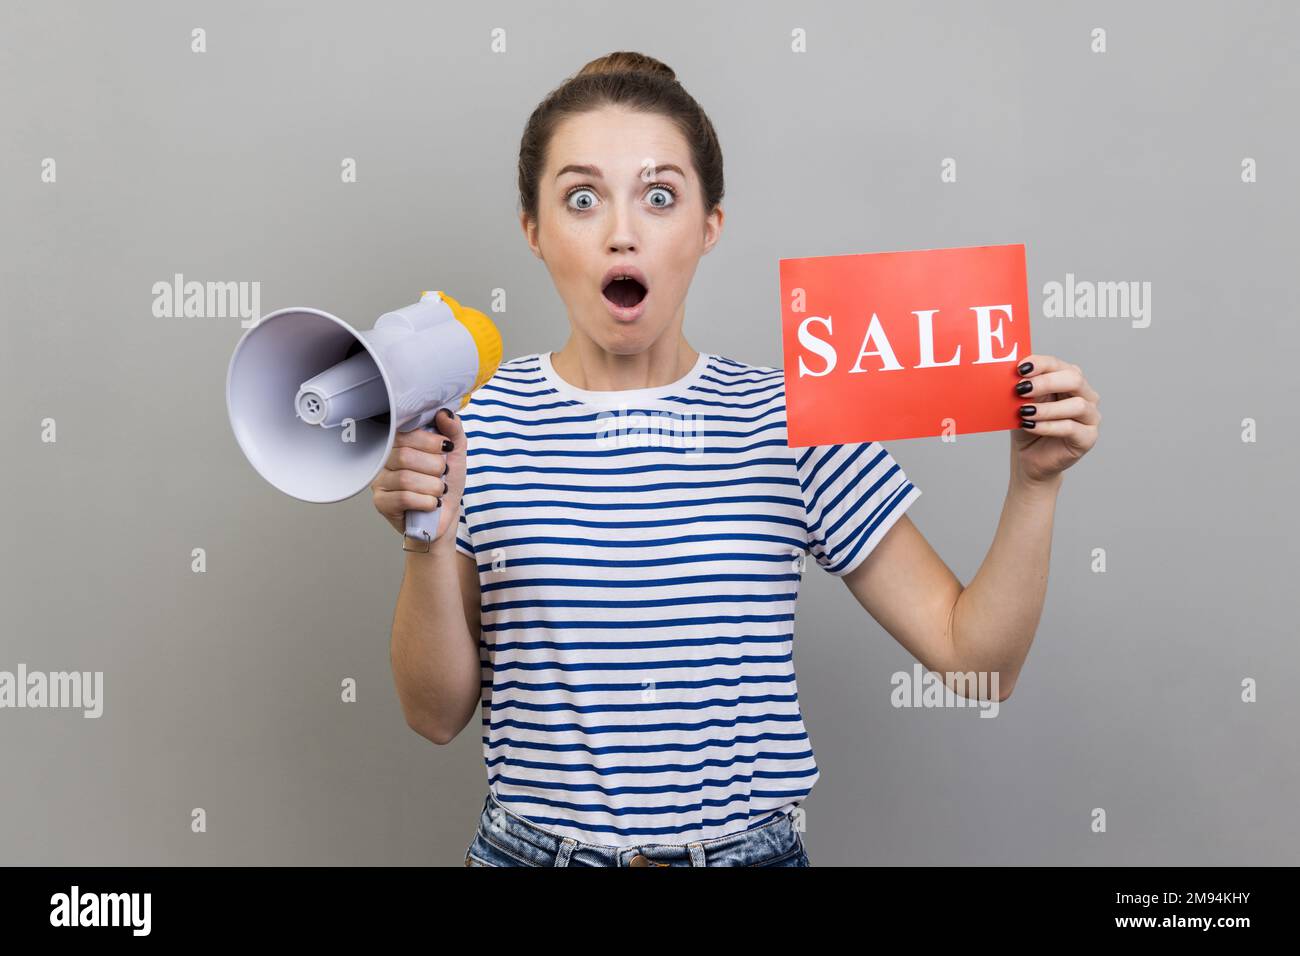 Portrait of shocked astonished amazed woman wearing striped T-shirt holding card with sale inscription and megaphone, making announcement. Indoor studio shot isolated on gray background. Stock Photo